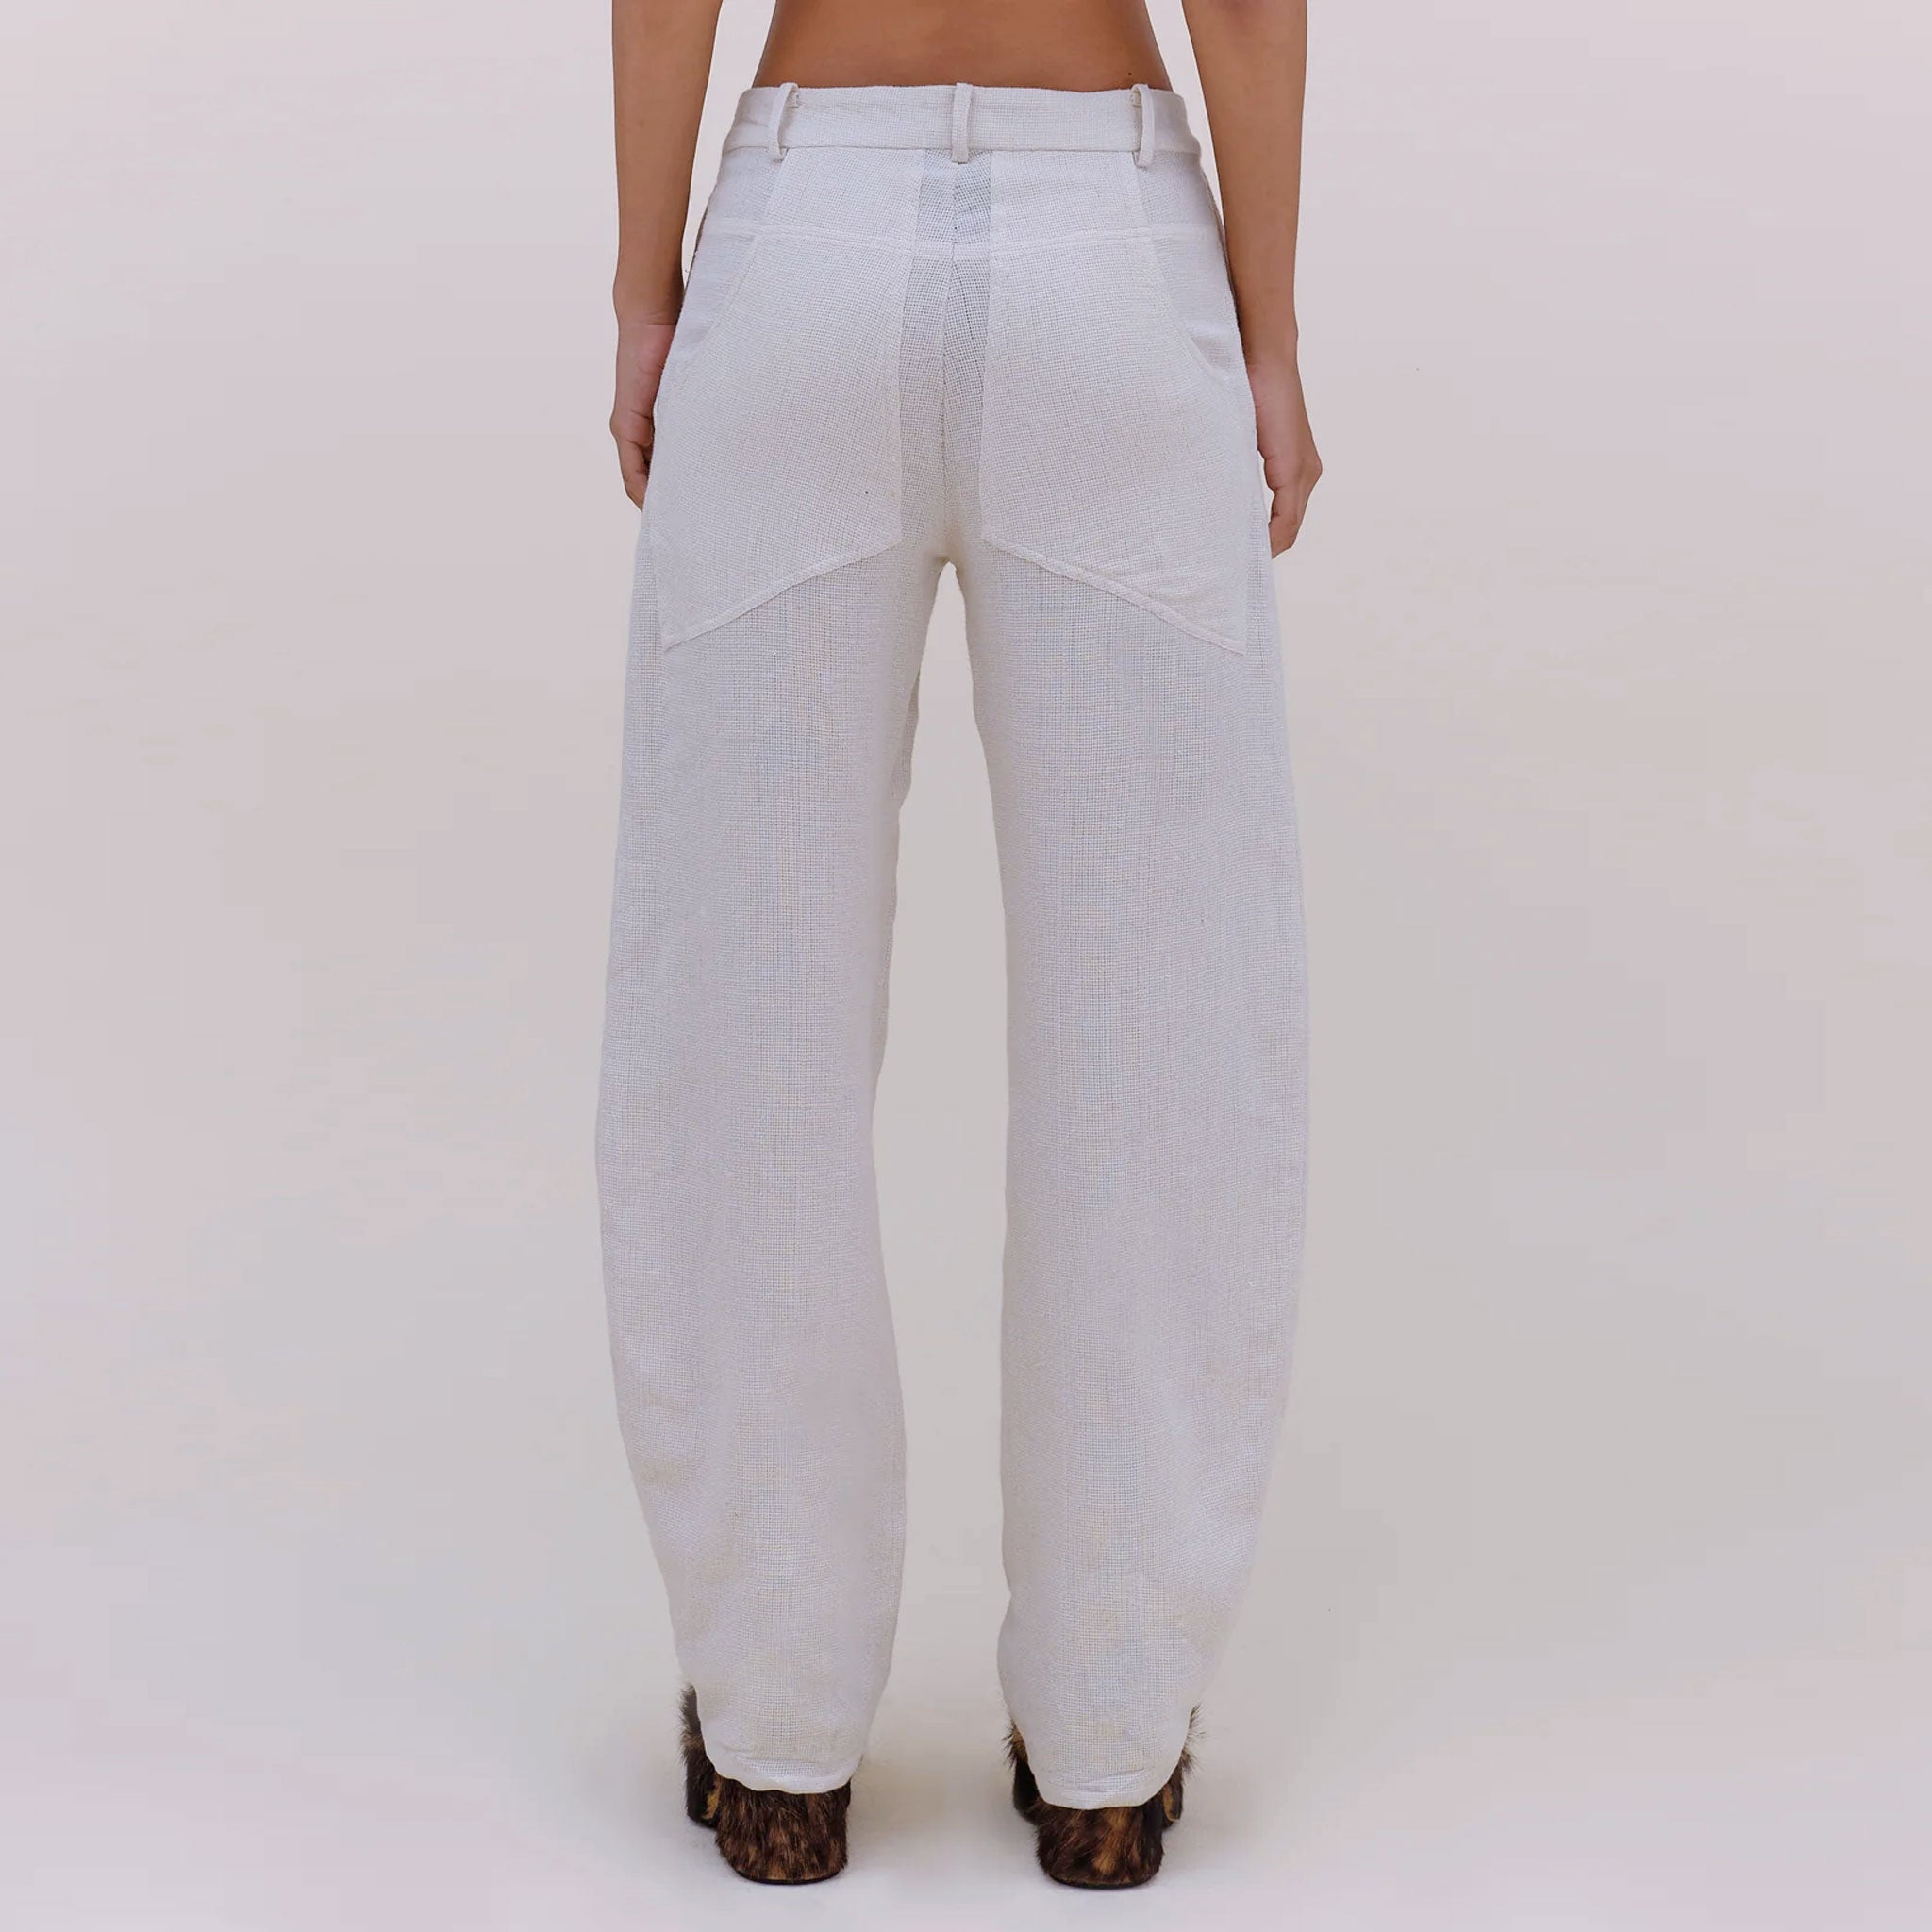 Back half body photo of model wearing the Linen Pant - Natural.